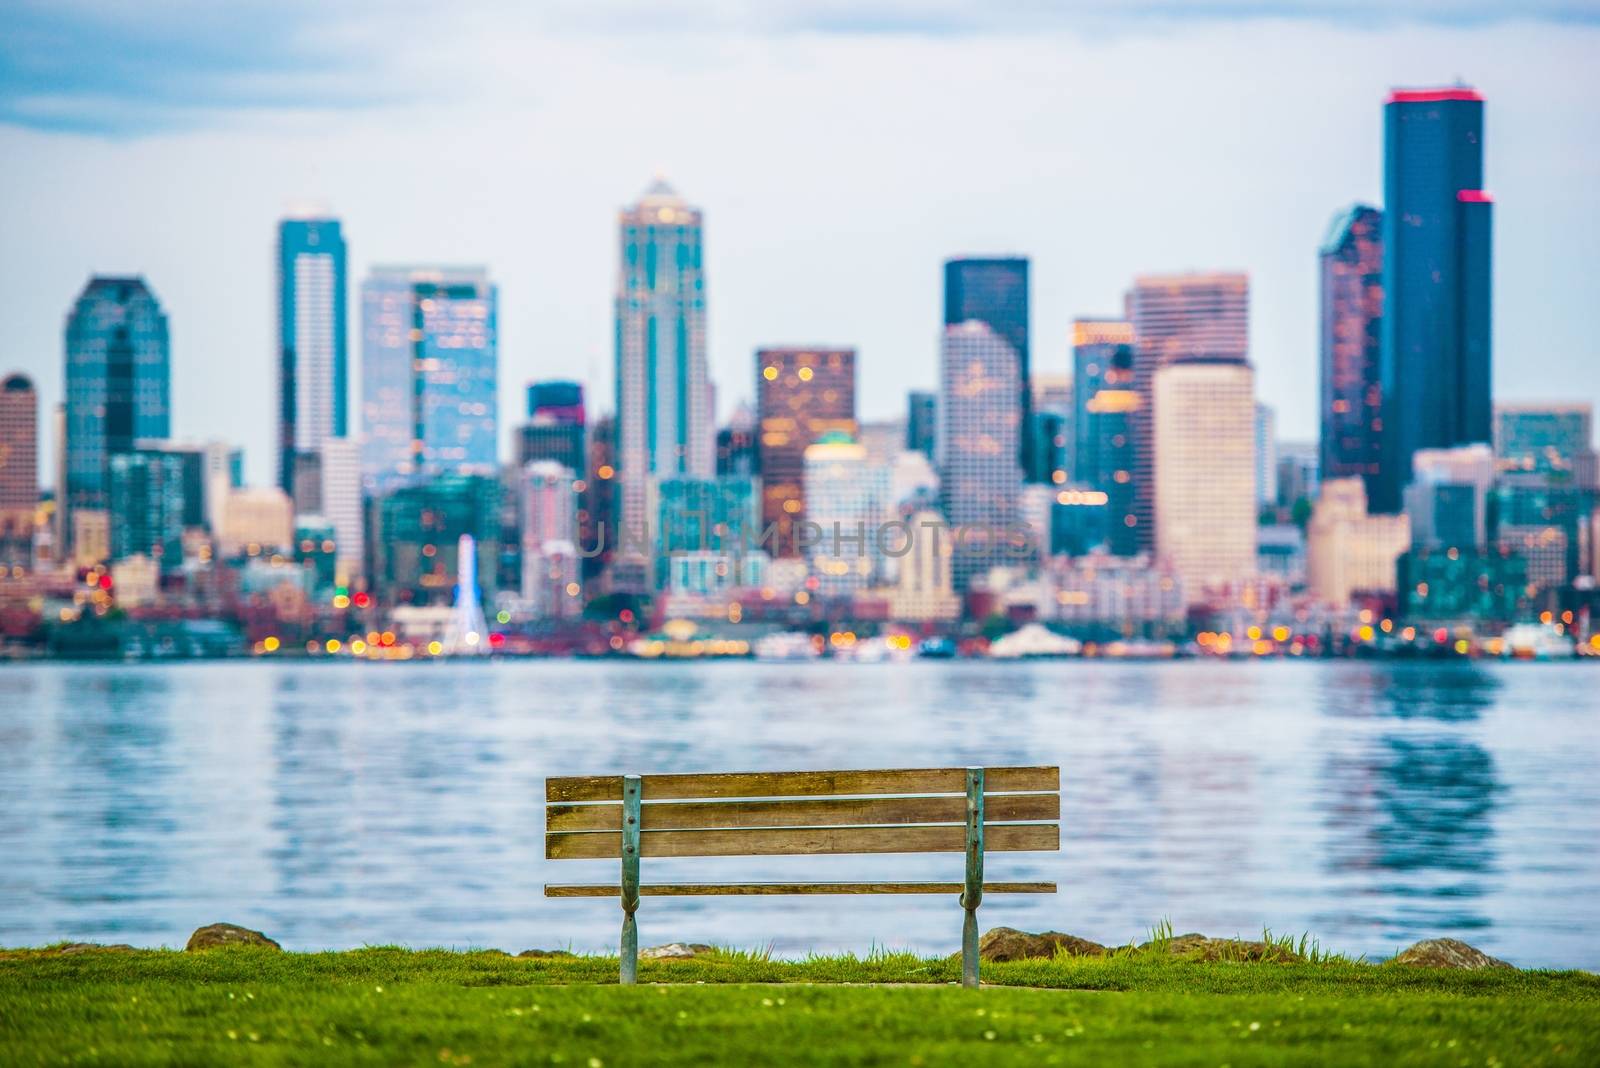 Seattle Vista Bench by welcomia